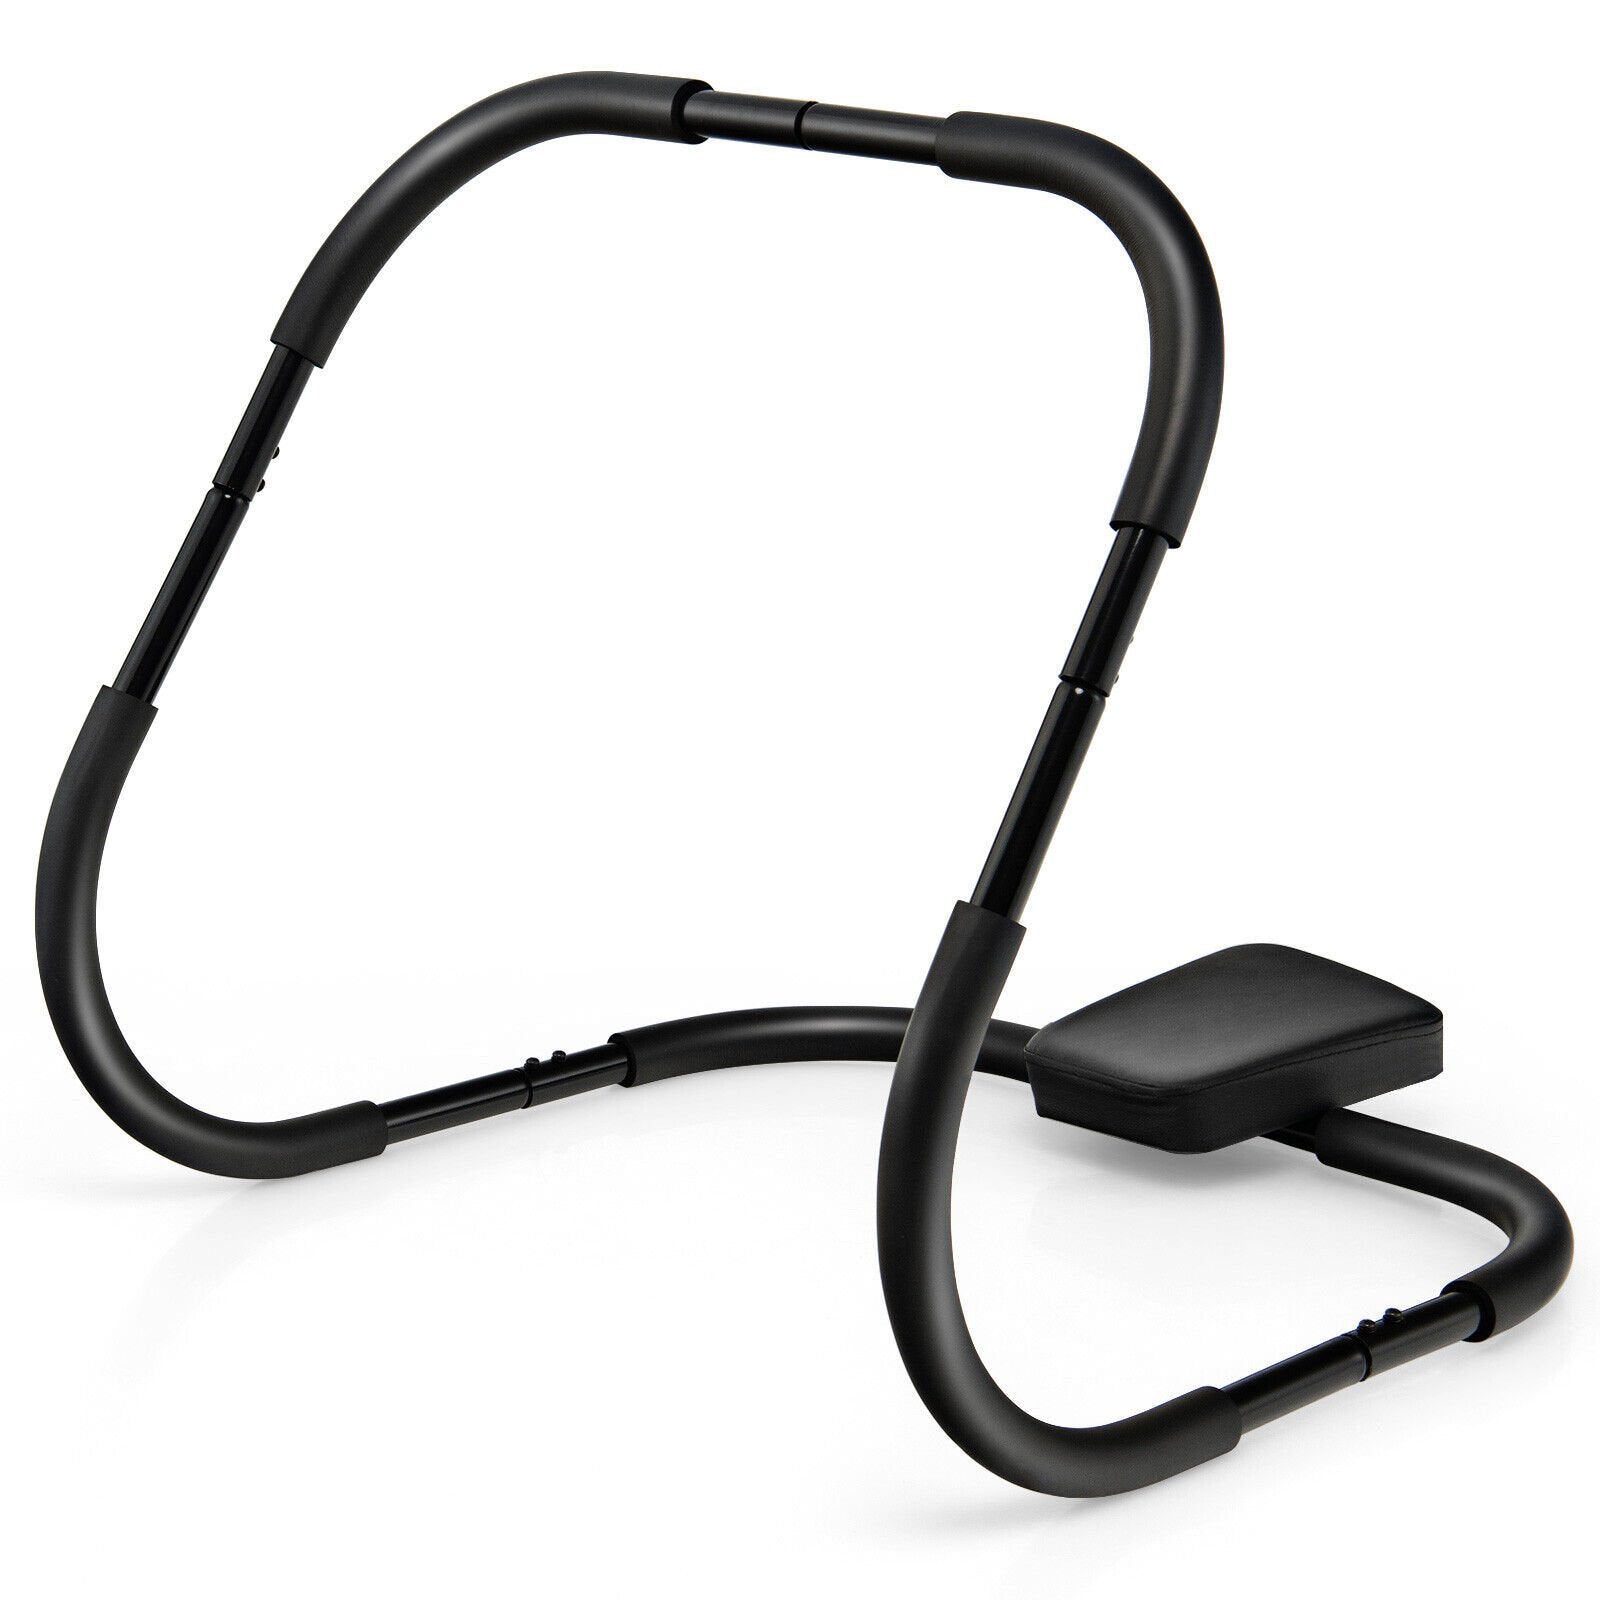 Portable AB Trainer Fitness Crunch Workout Exerciser with Headrest, Black at Gallery Canada